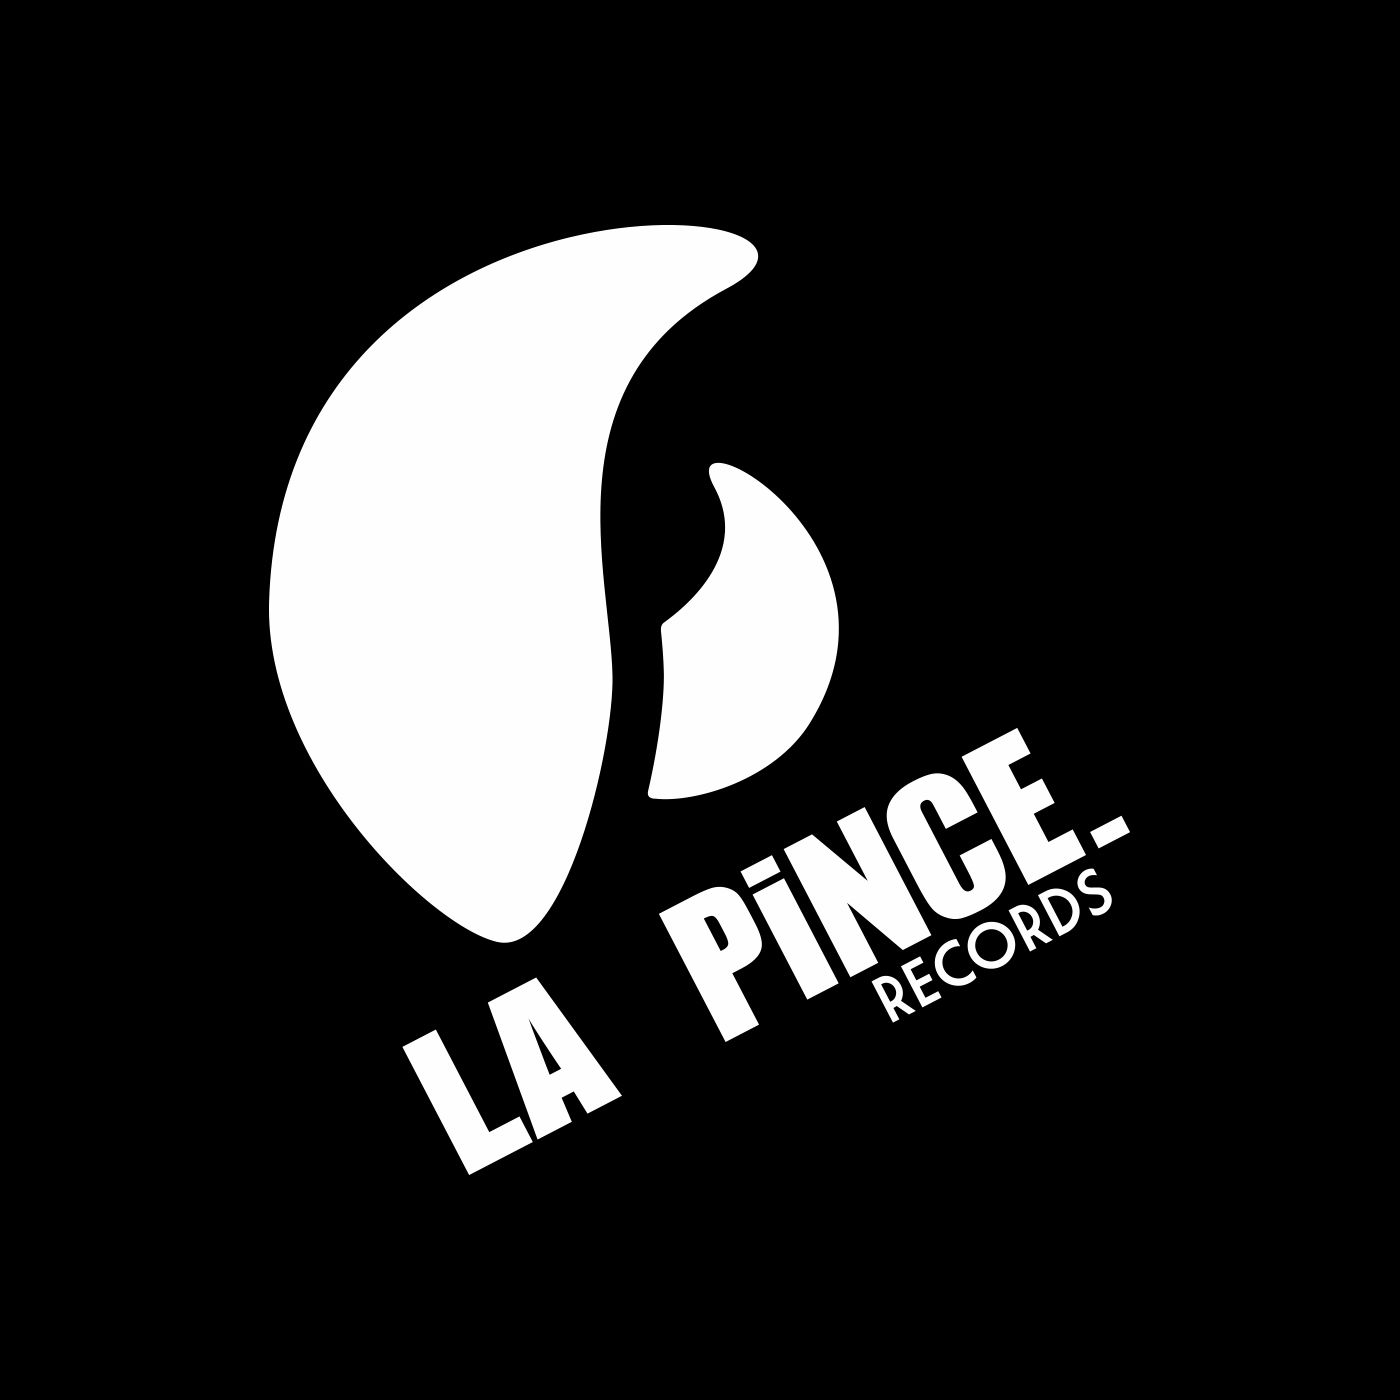 La Pince Records - PODCASTS